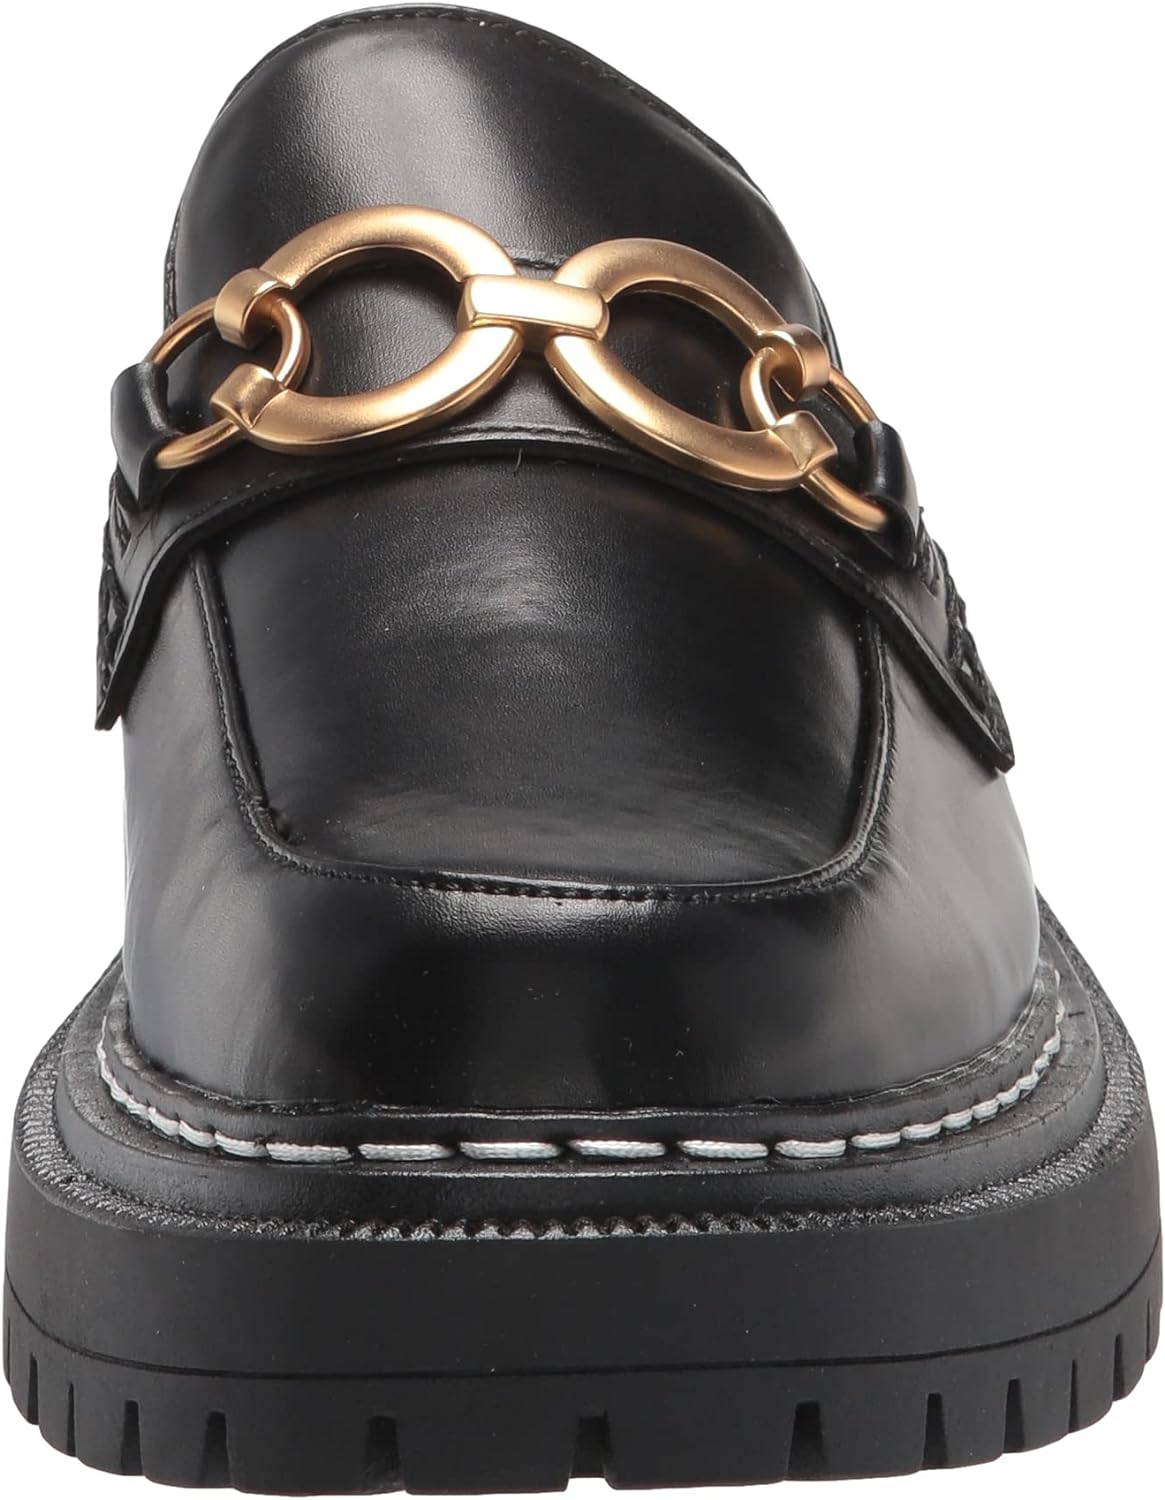 Circus NY By Sam Edelman Women's Elena Loafer Mule